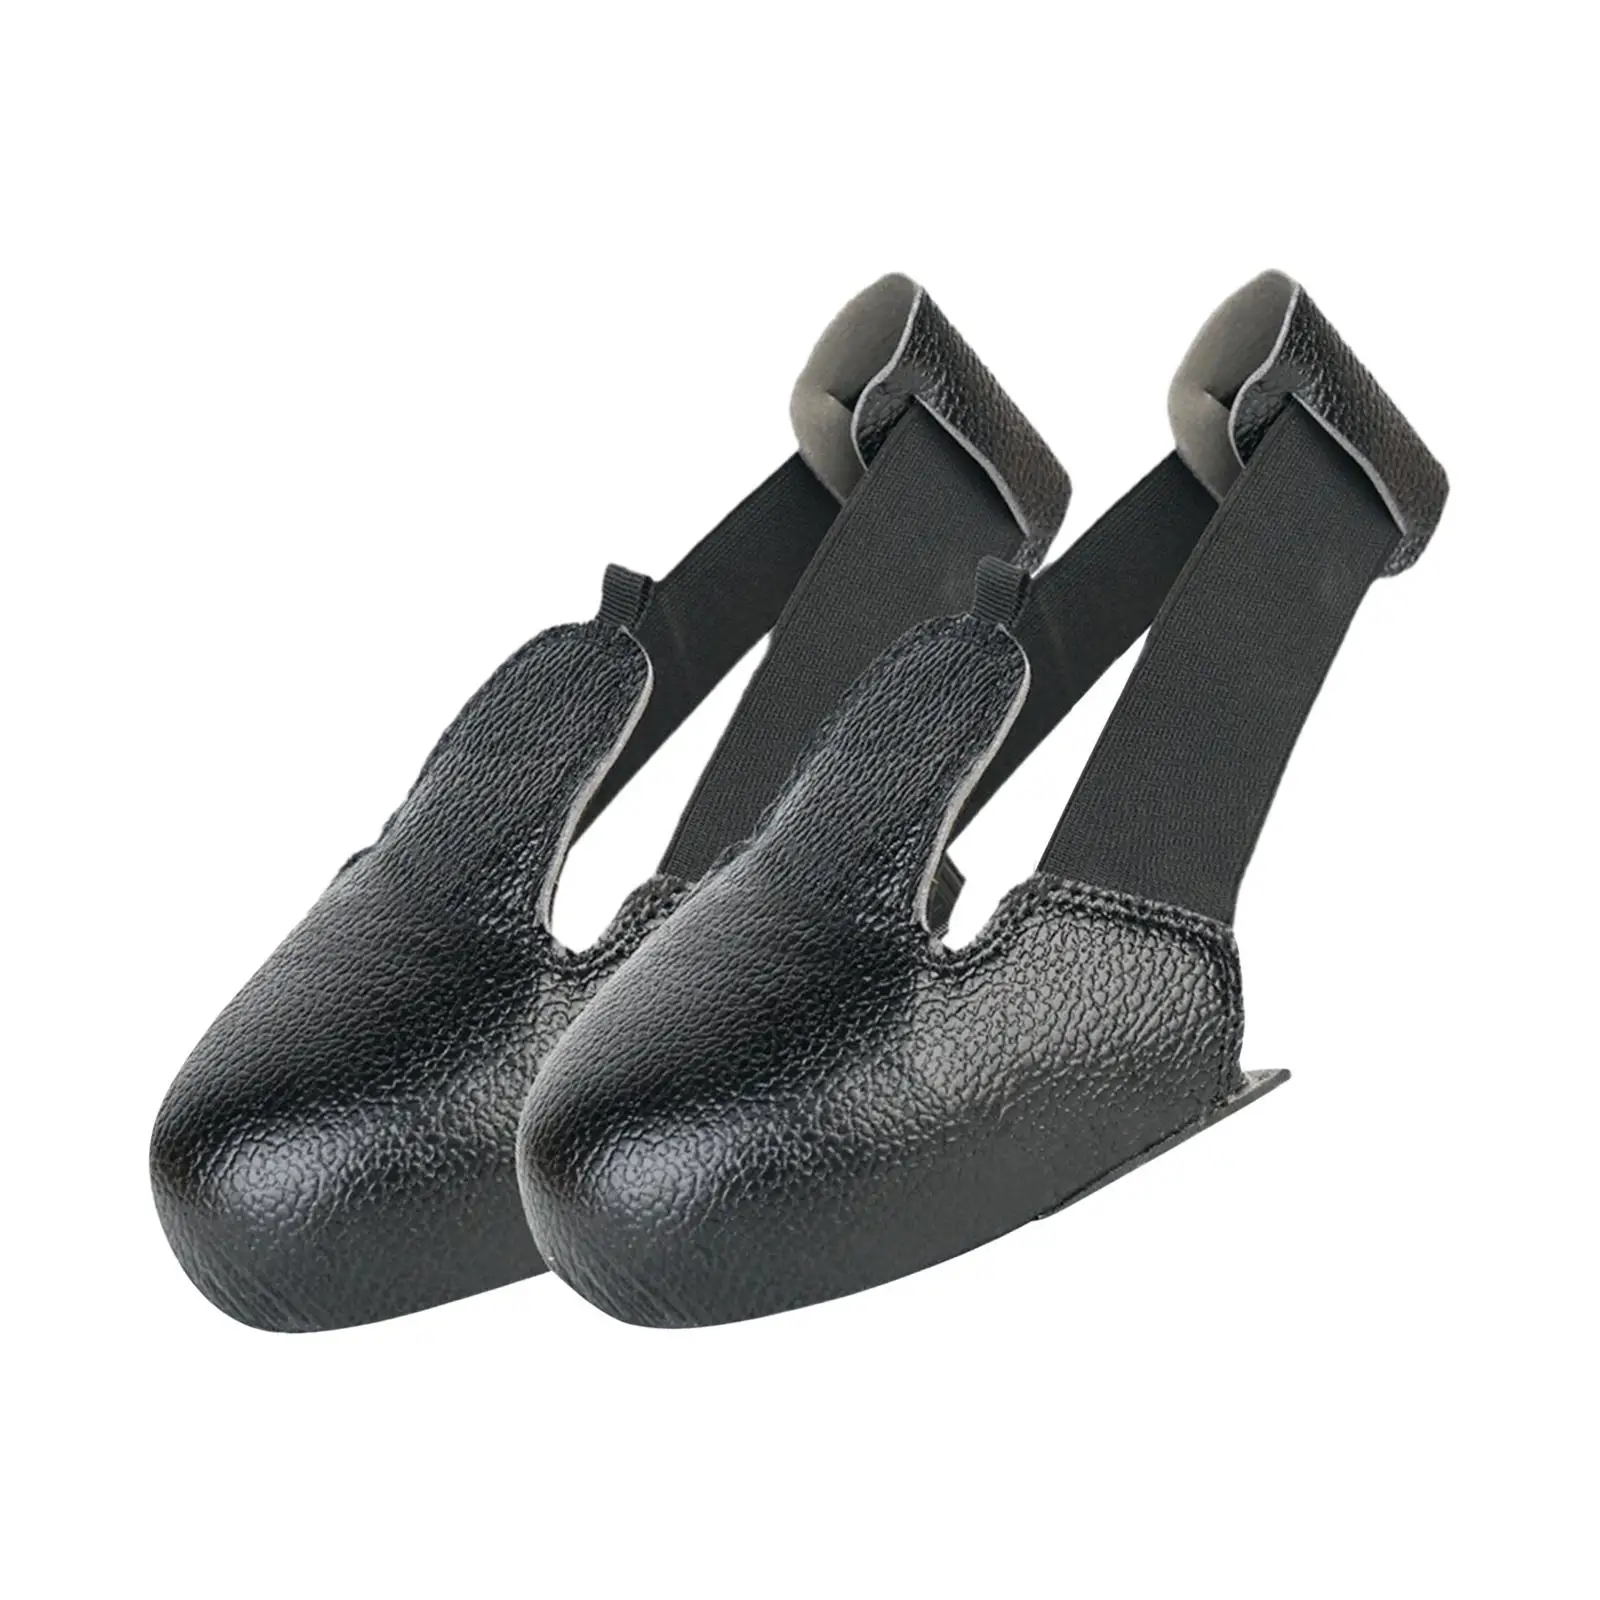 Toe Cap Safety Overshoes Toe Work Shoe Cover Shoe Cap Leather Sole Caps Anti Smashing Leather Shoes Covers